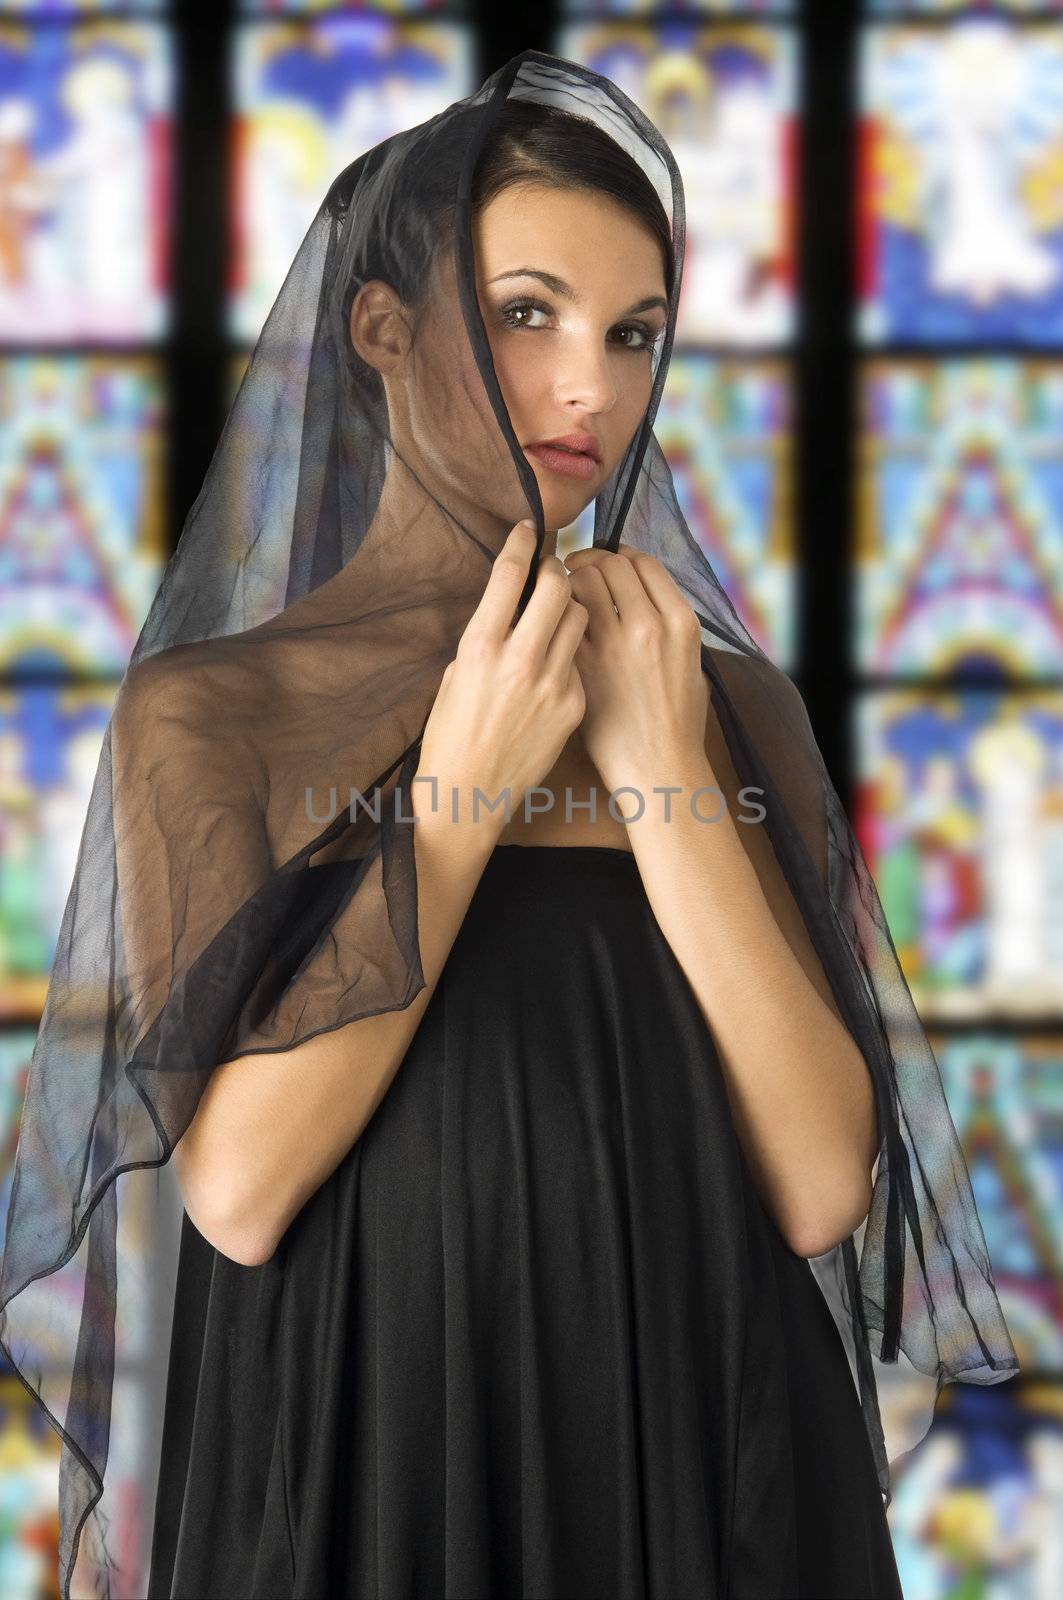 beautiful woman with a black veil on her head like old sicily fashion